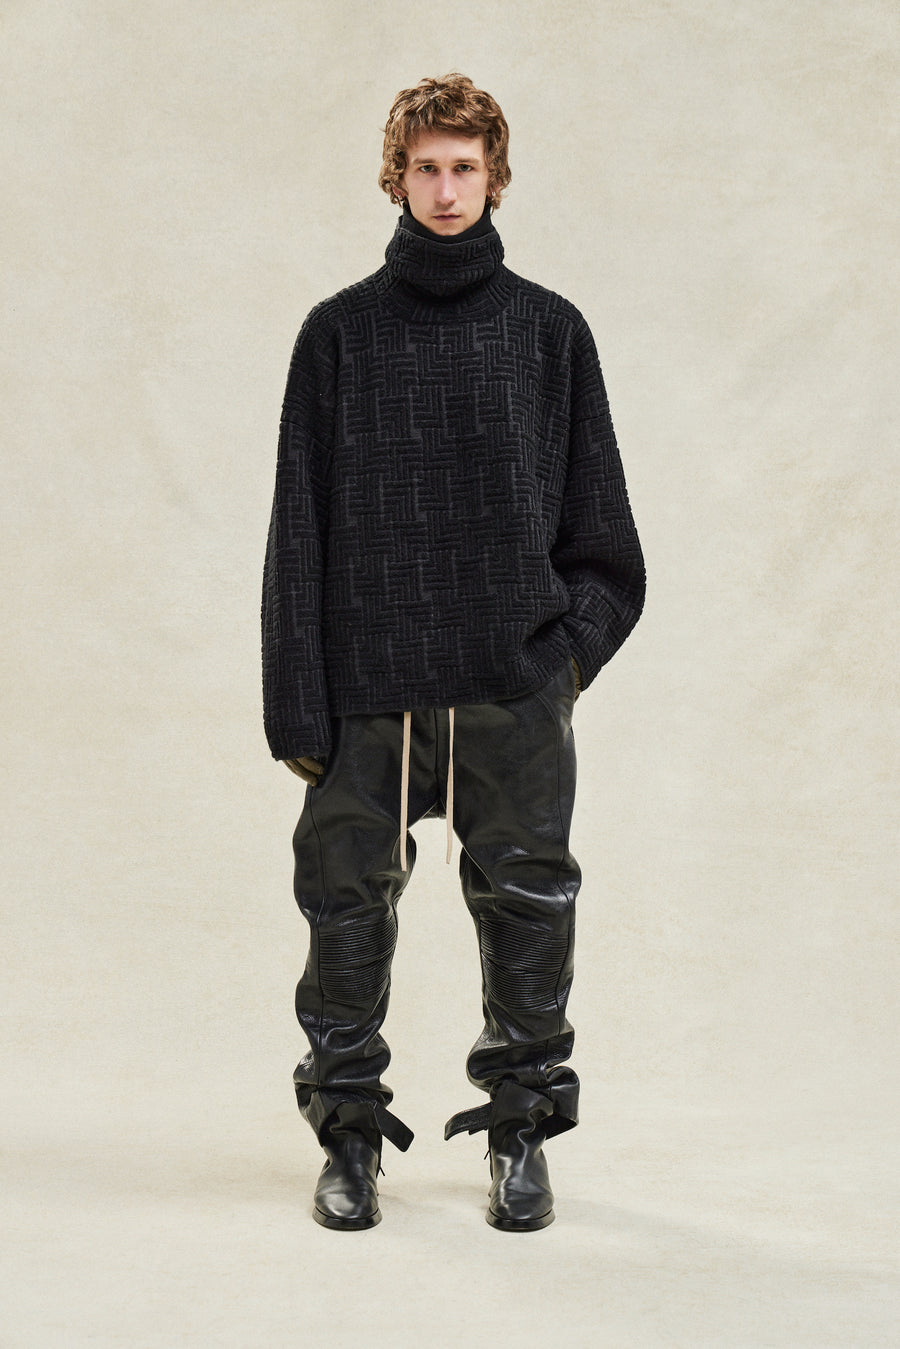 Wool Jacquard High Neck Sweater - Fear of God